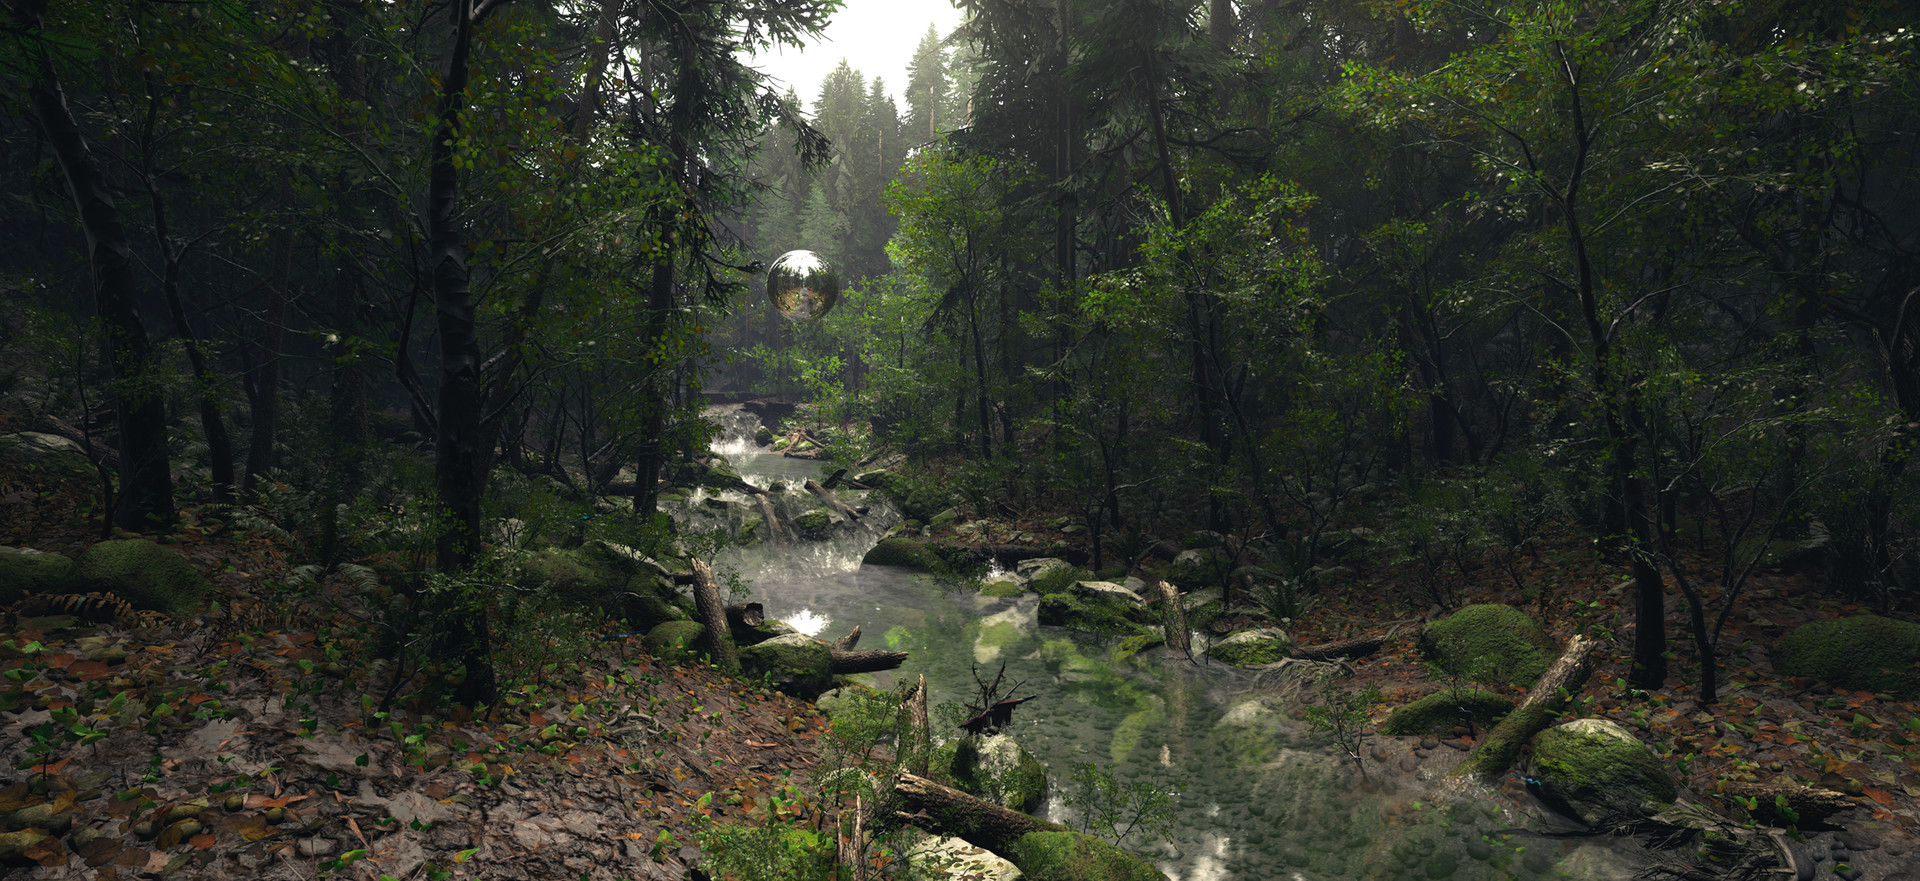 Media asset in full size related to 3dfxzone.it news item entitled as follows: Crytek pubblica nuovi screenshots del motore grafico CryEngine V | Image Name: news24020_CryEngine-V-Screenshot_2.jpg